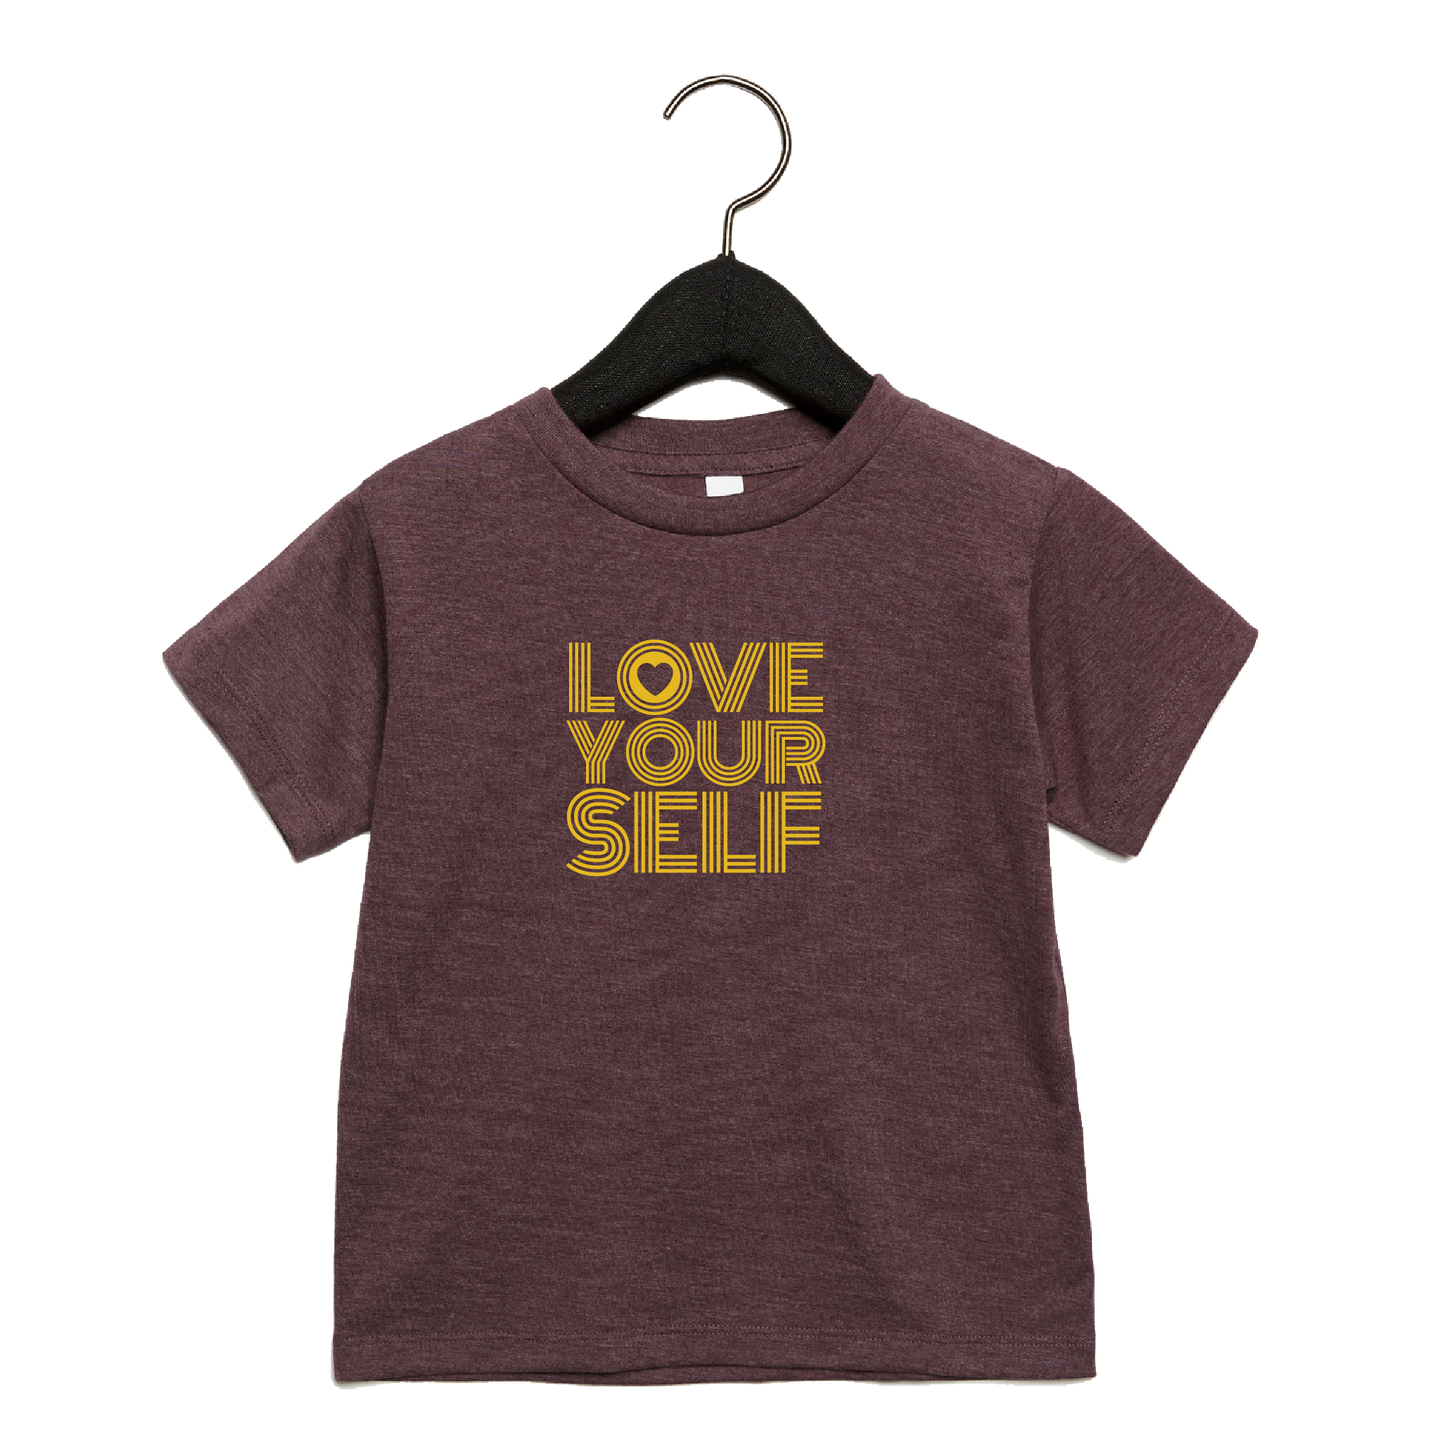 Love Yourself Toddler T-shirt